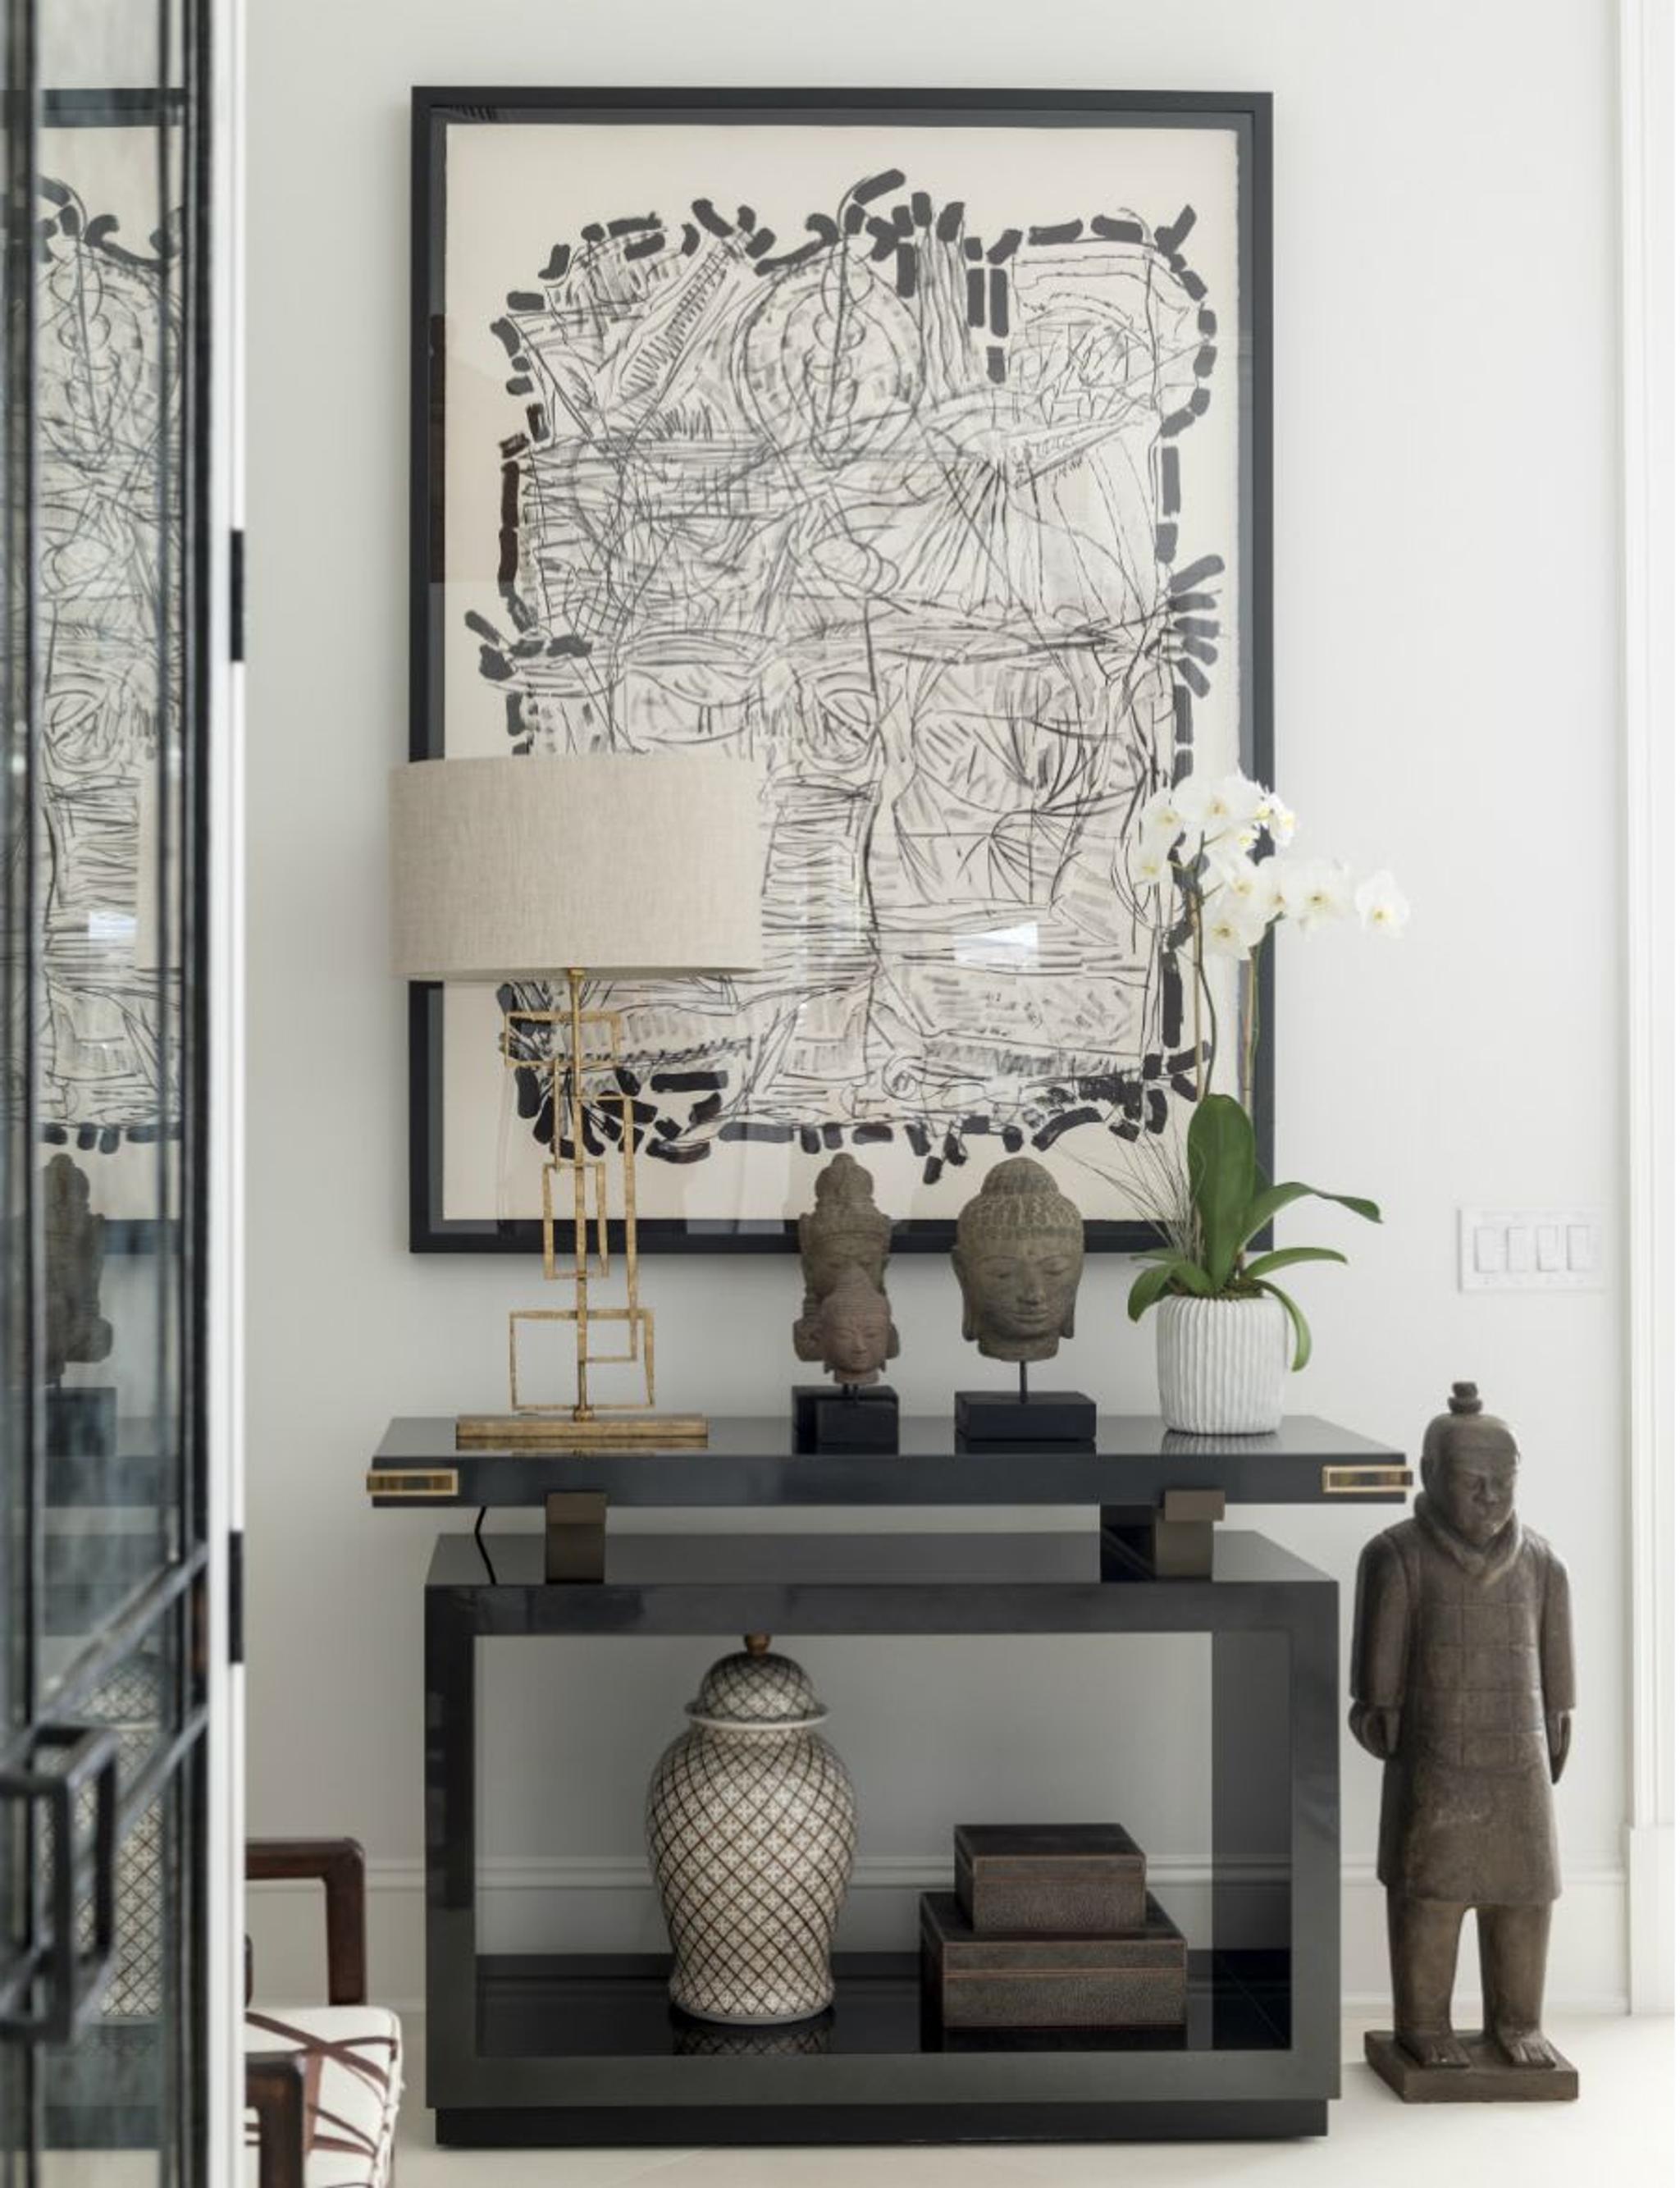 Chic black and white entry way by Les Ensembliers